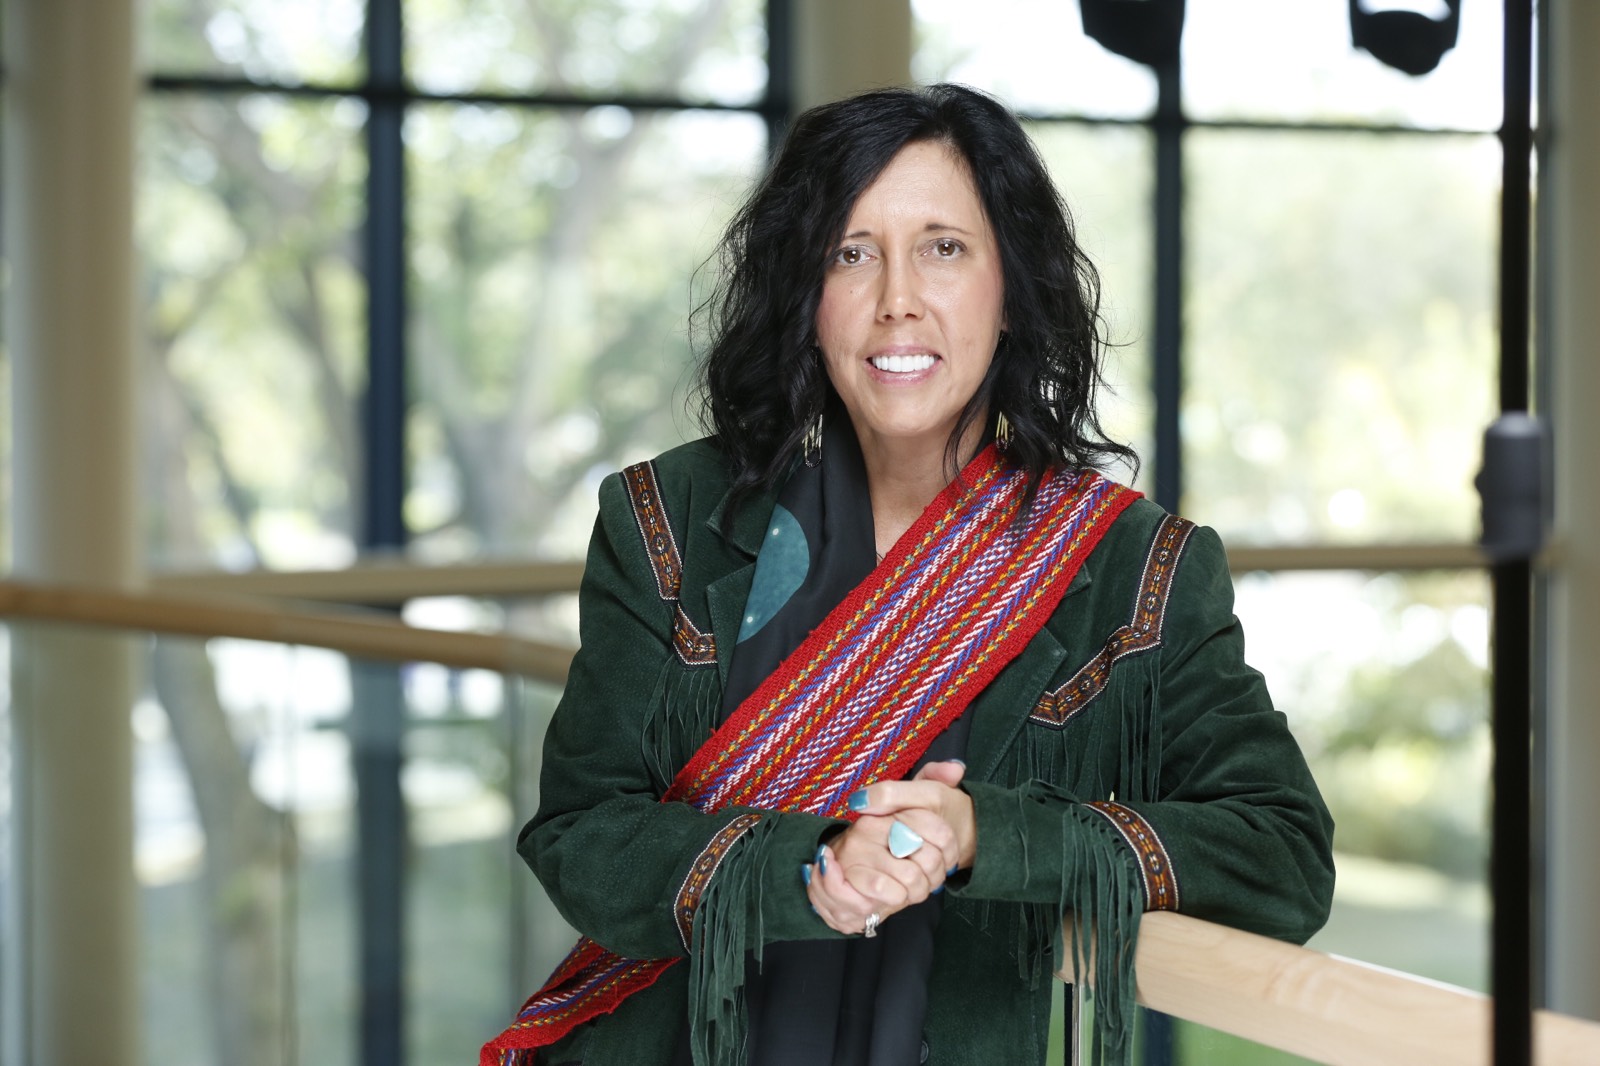 Carrie Bourassa will serve as the scientific director of the Institute of Indigenous Peoples' Health at the U of S.